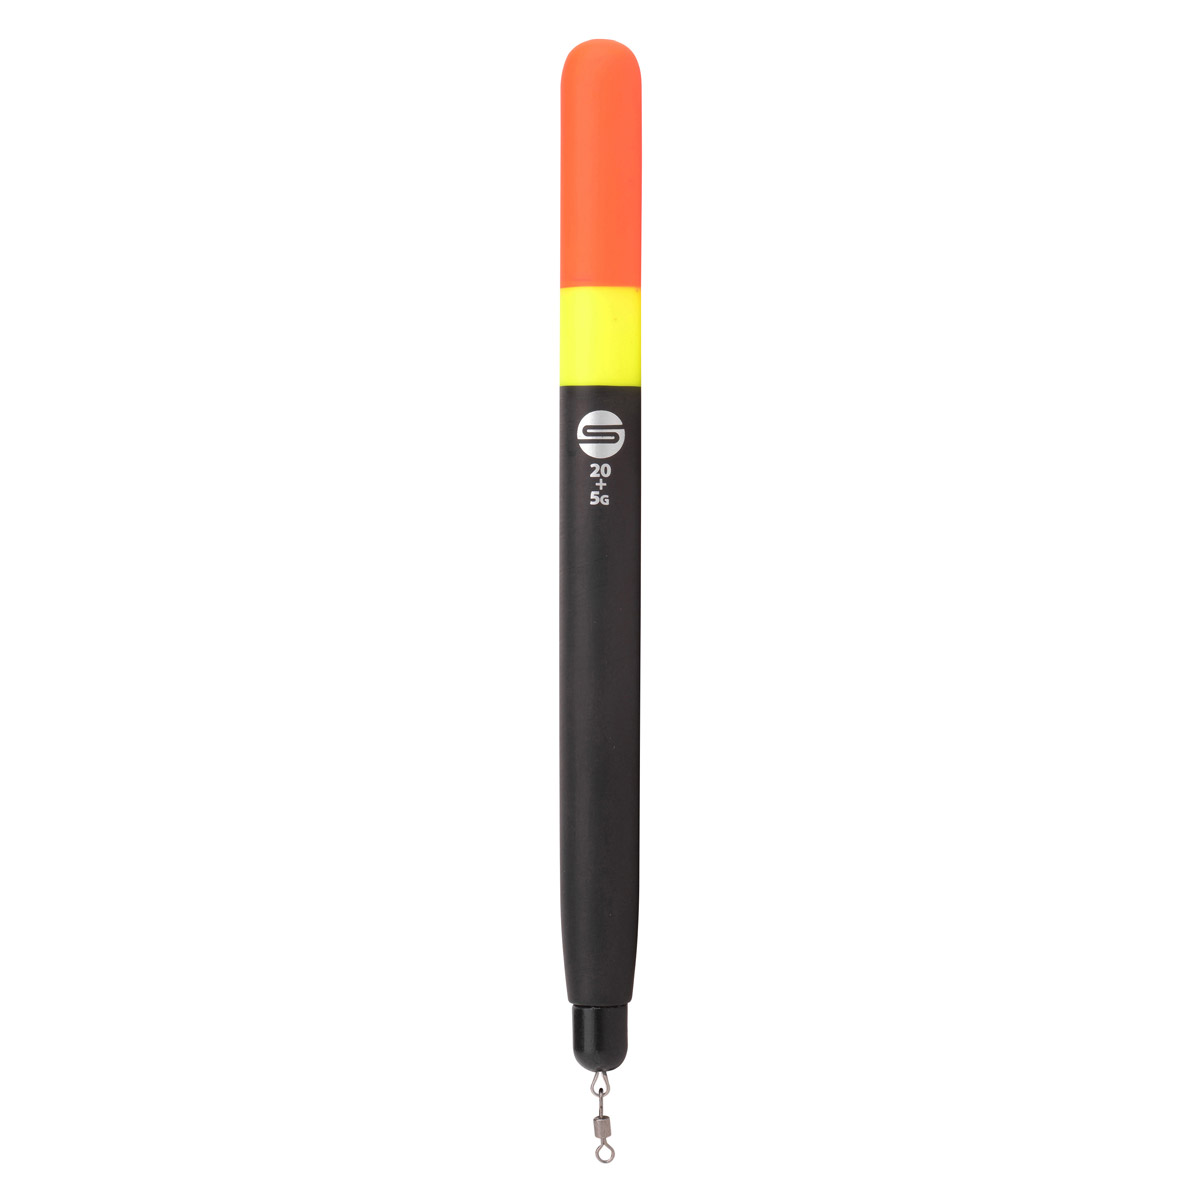 Spro Pike Pencil Float Weighted